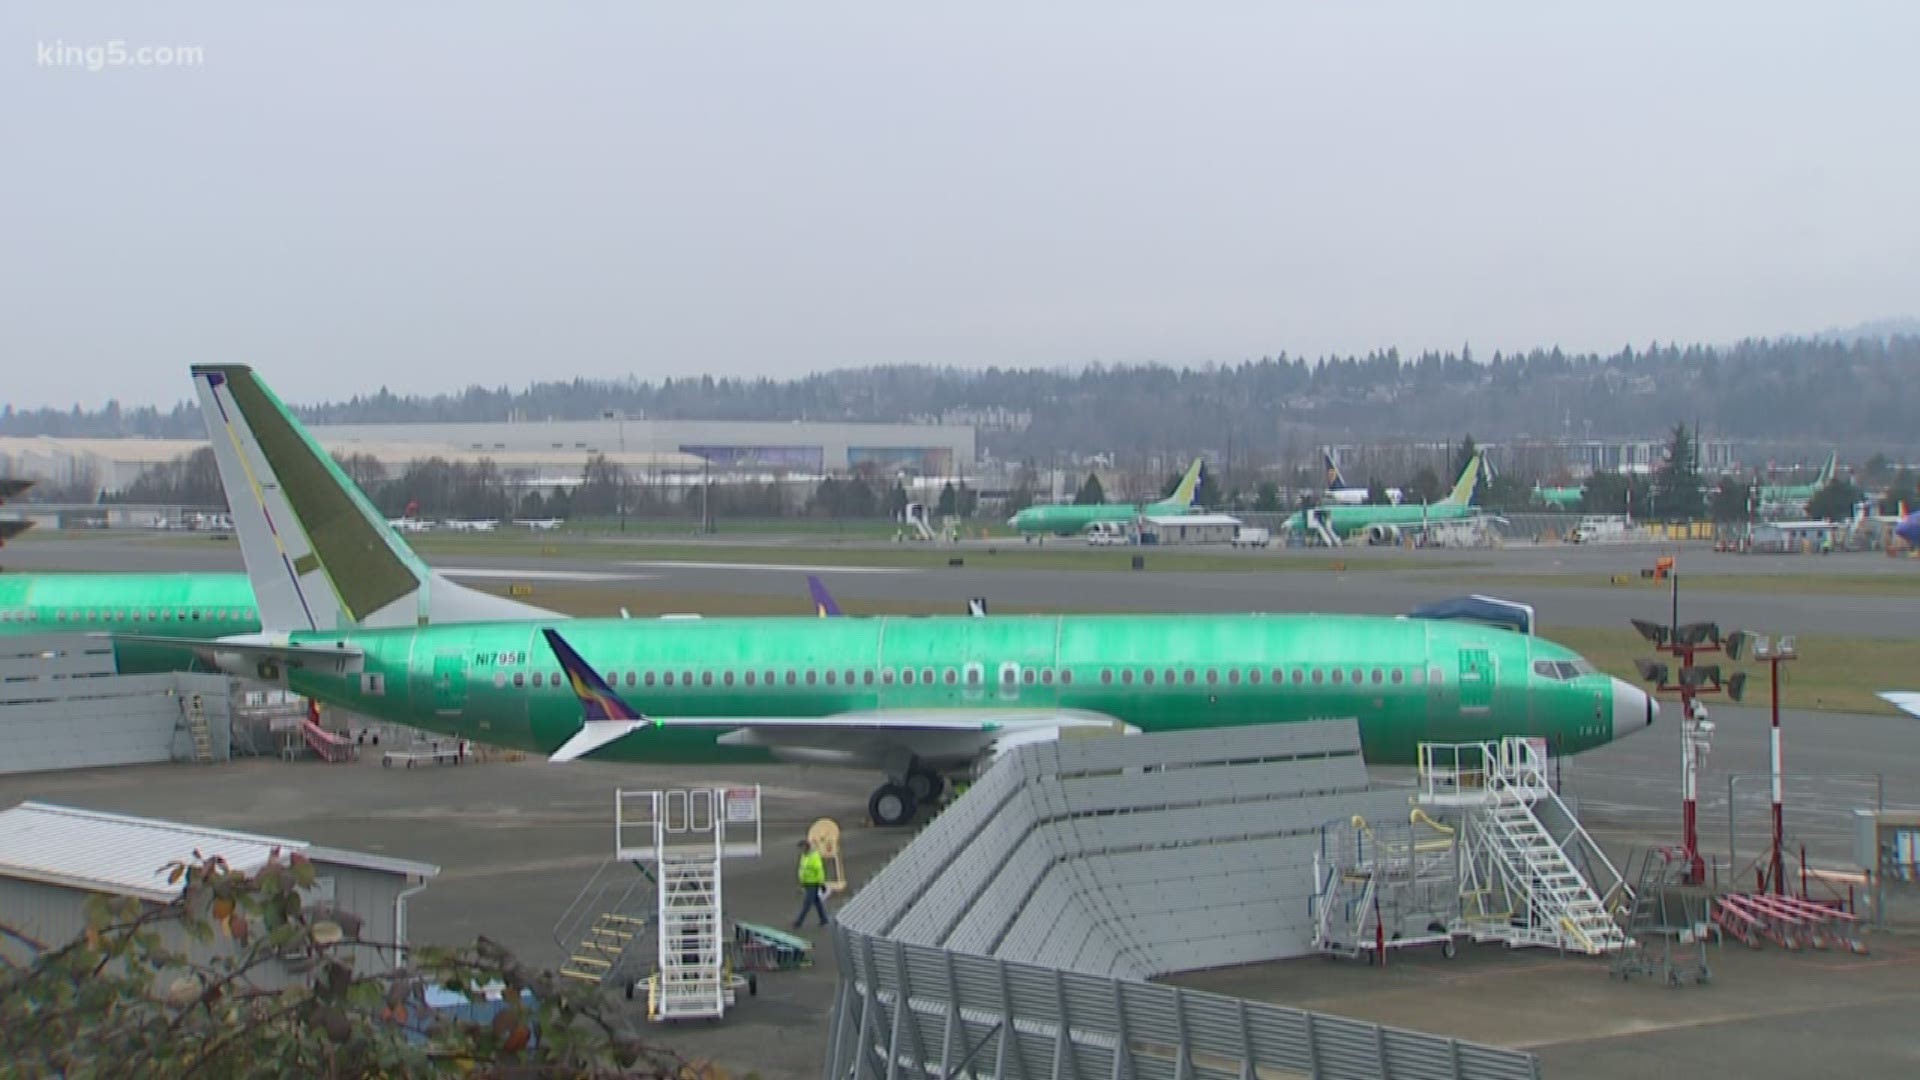 Tomorrow, a former Boeing manager turned whistleblower will testify before a house committee about what he says were chaotic conditions inside Boeing's 737 factory.